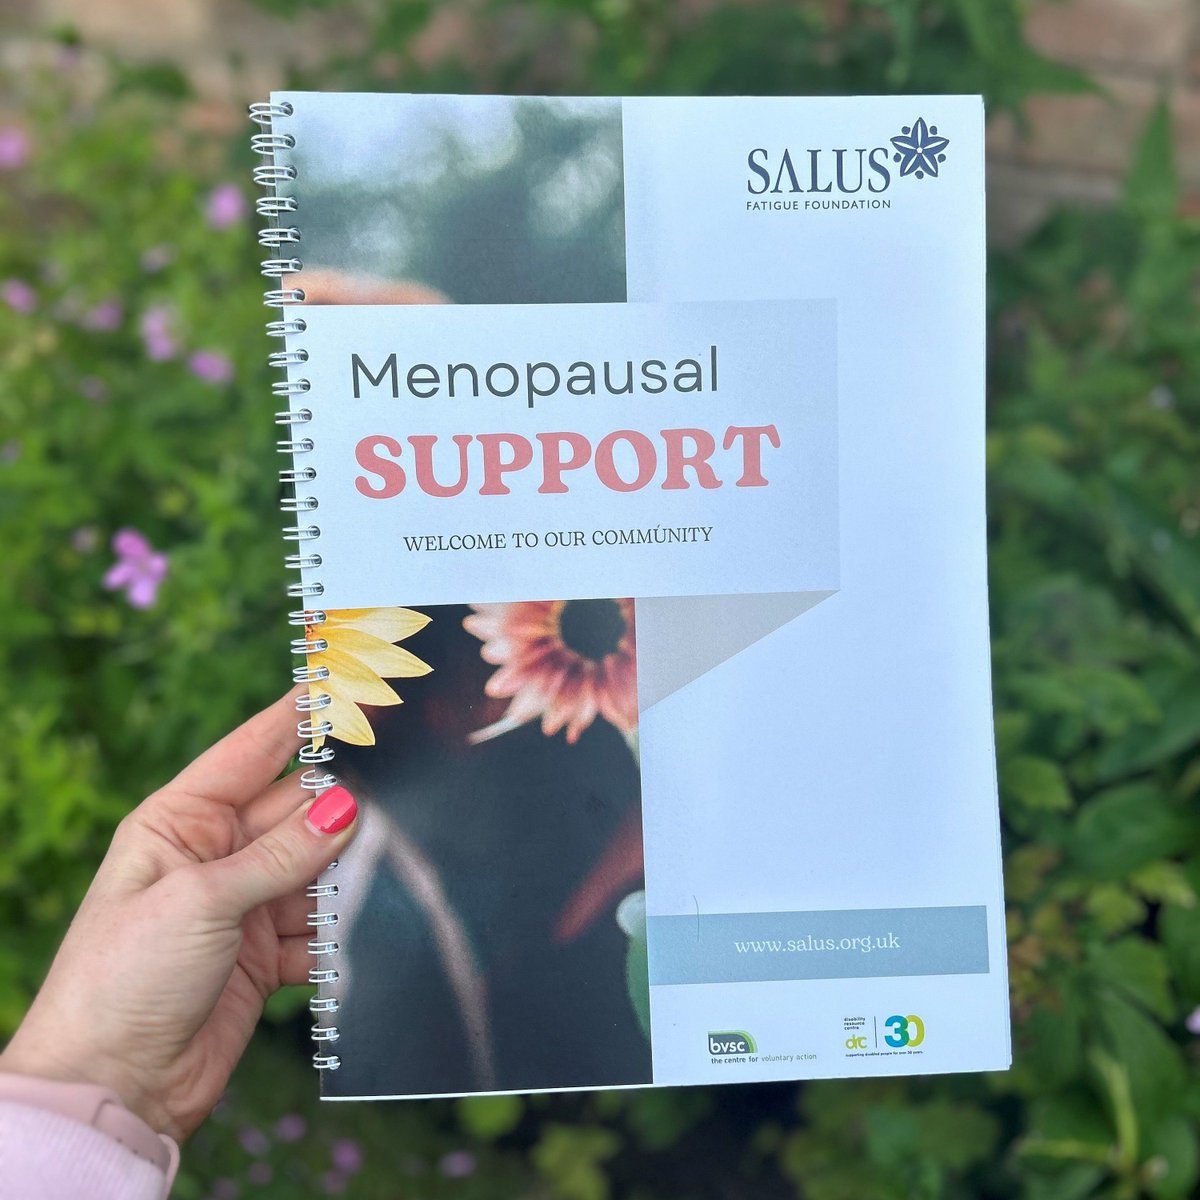 Our free Menopause workshops are back up and running for another year across Birmingham and Solihull. All available dates are on our Eventbrite or online calendar at my.salus.org.uk. We look forward to seeing you there. 🥰